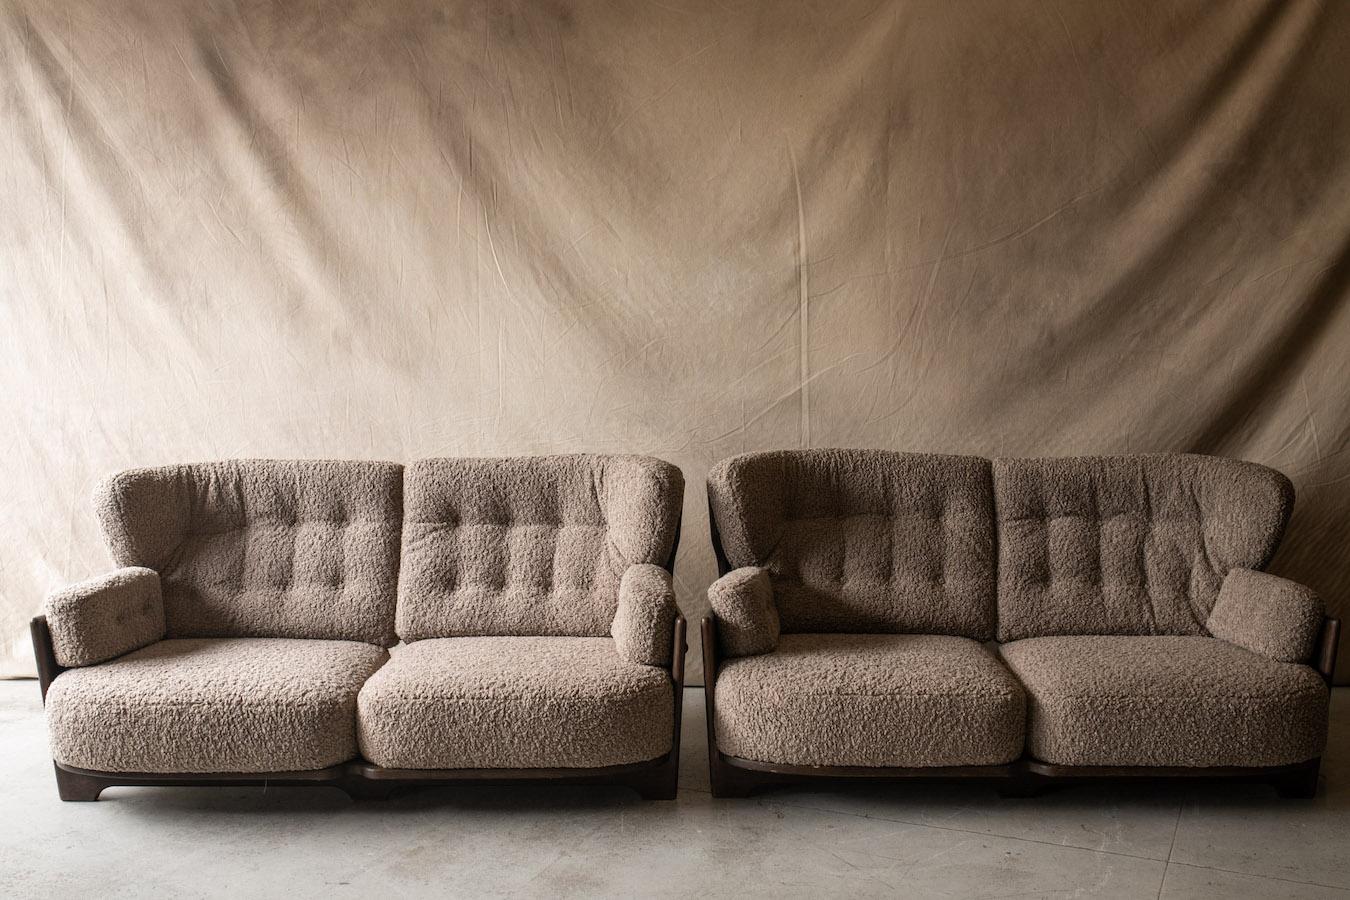 Vintage pair of Guillerme Et Chambron sofas, model Denis, from France, circa 1960. Solid stained oak construction. Cushions are later upholstered in a soft light grey, creme boucle fabric.

We don't have the time to write an extensive description on